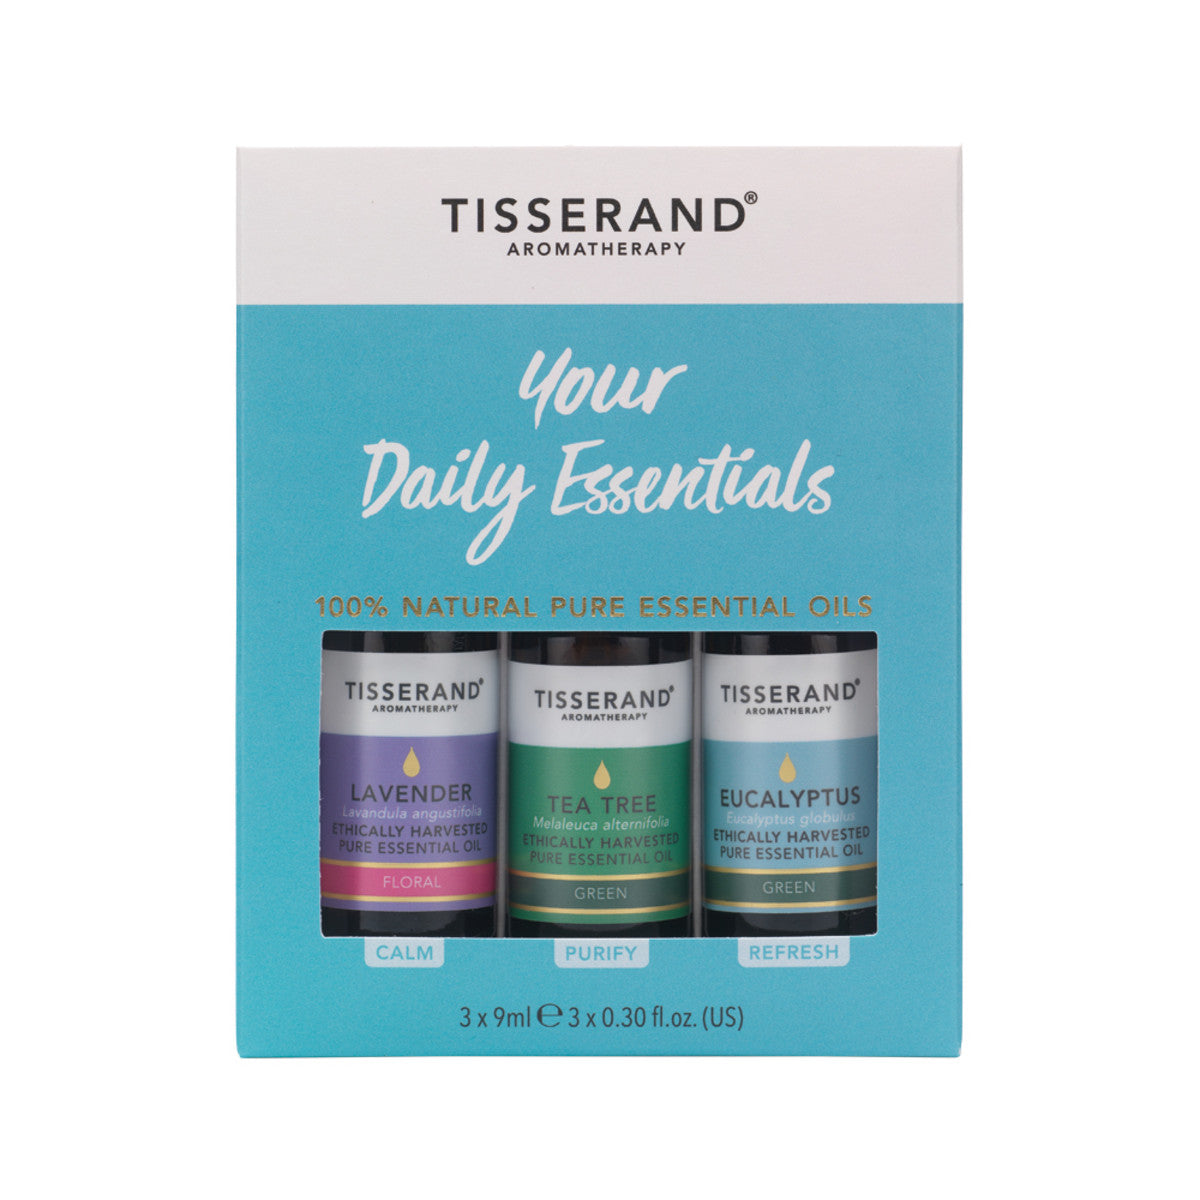 Tisserand Your Daily Essential Oils 9ml x 3 Pack